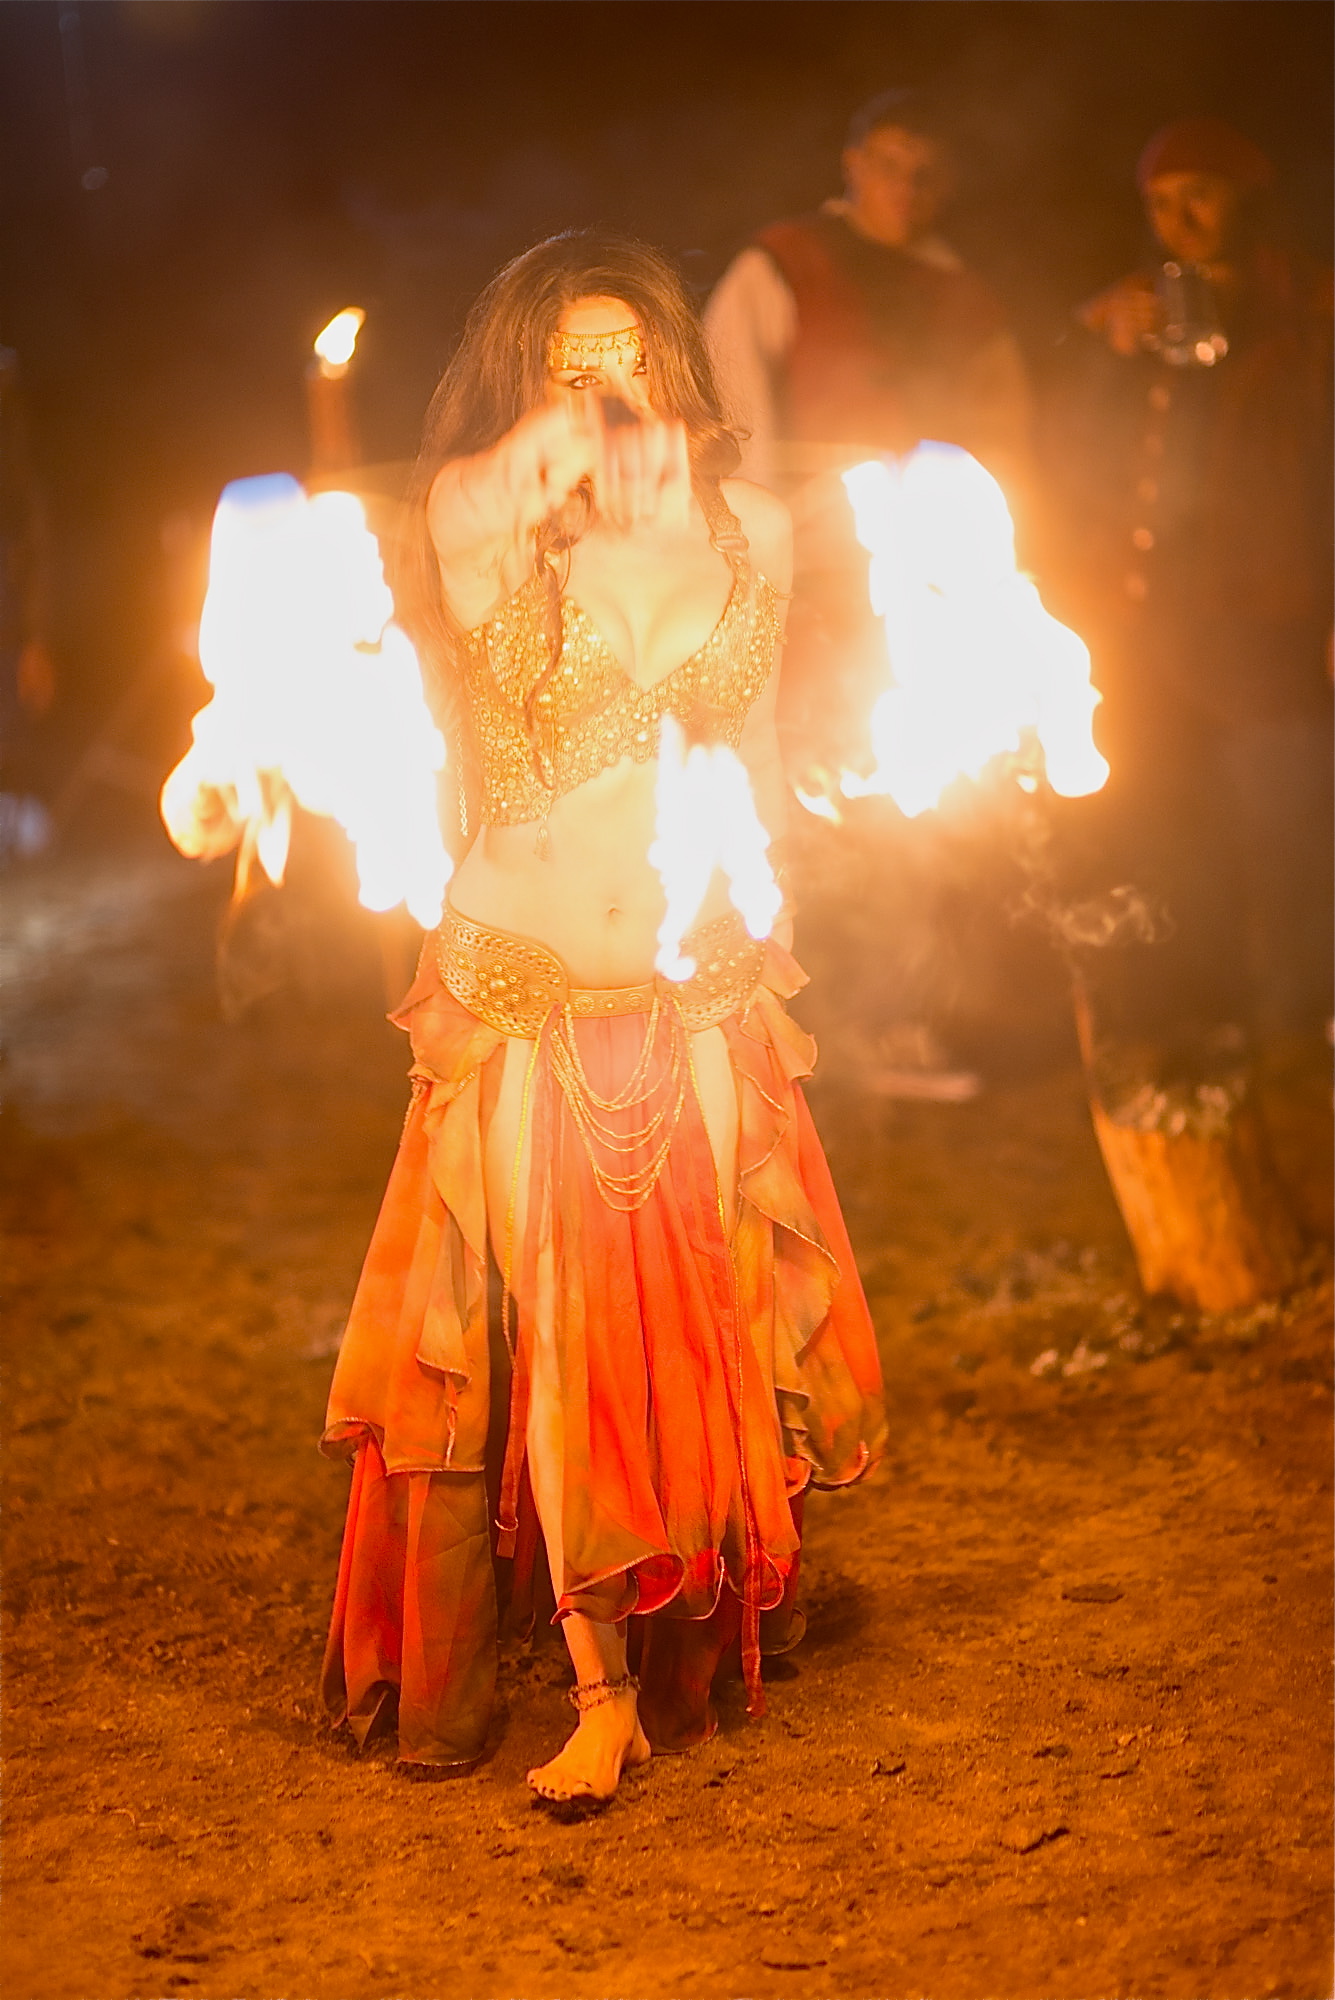 Saye Yabandeh as SHOLEH Fire dancing in the film directed by: Saye Yabandeh